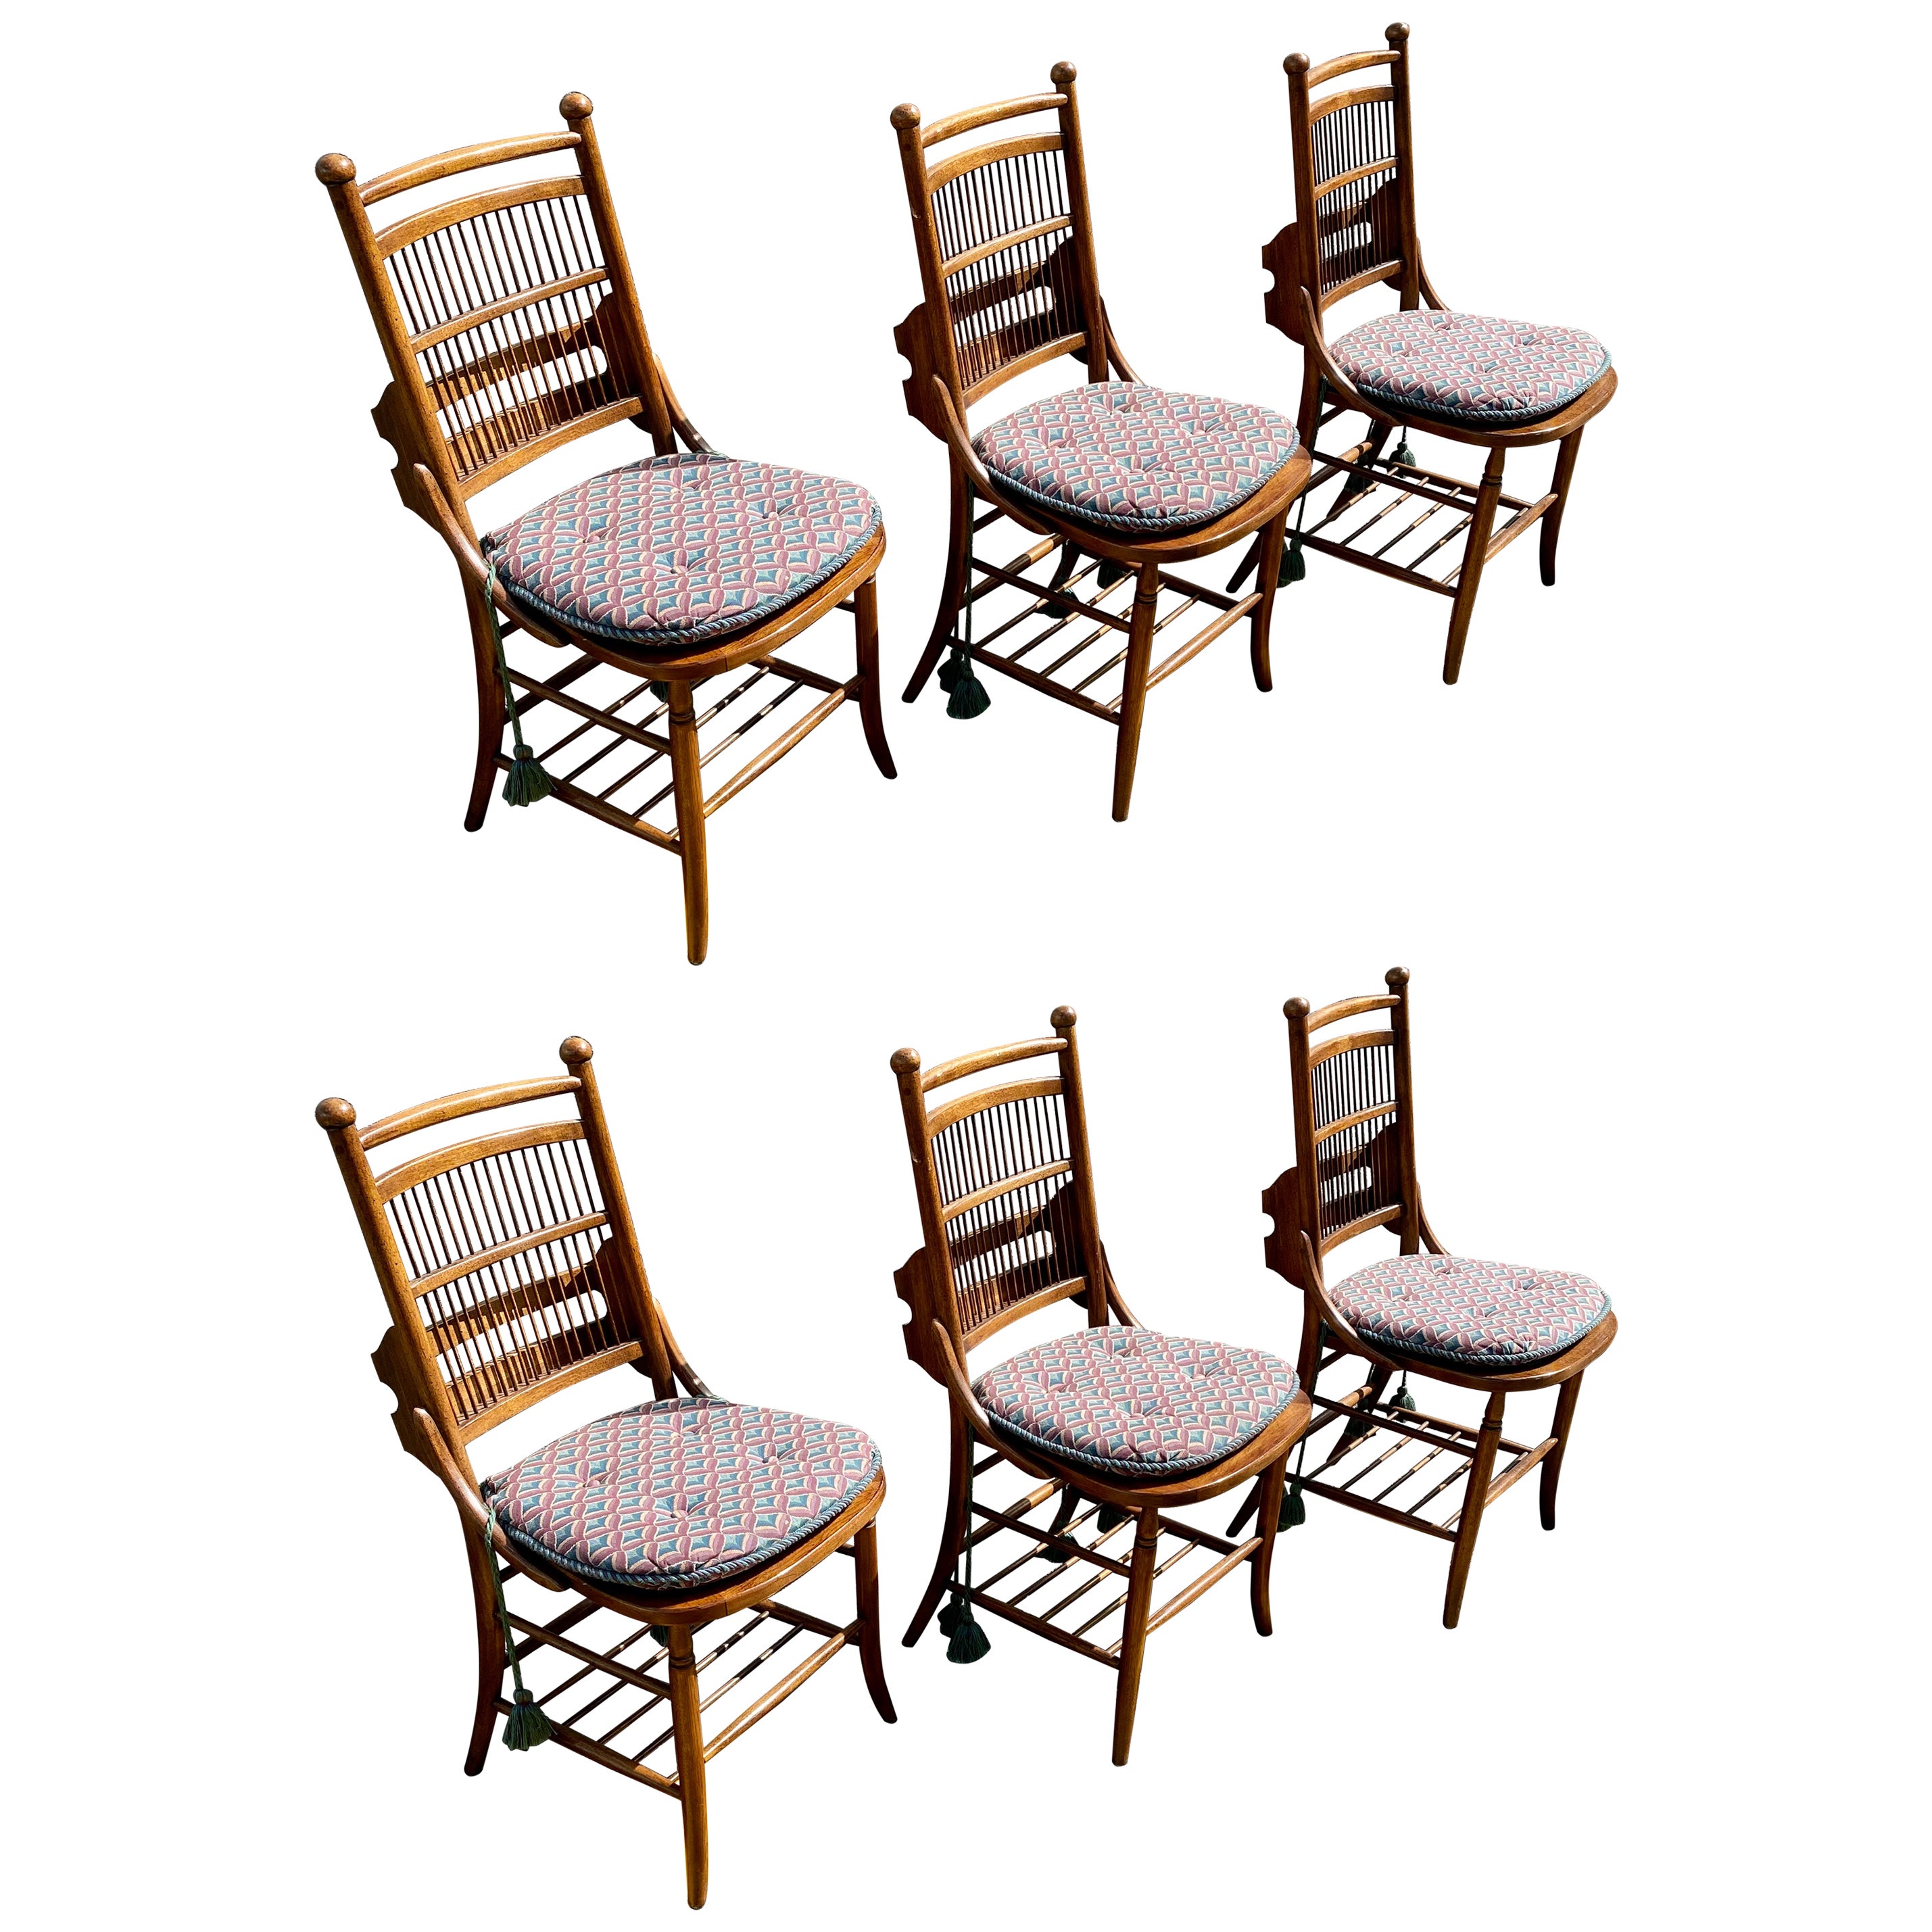 1960s Thomasville Cane Slatted Wood Dining Chairs. Set of 6